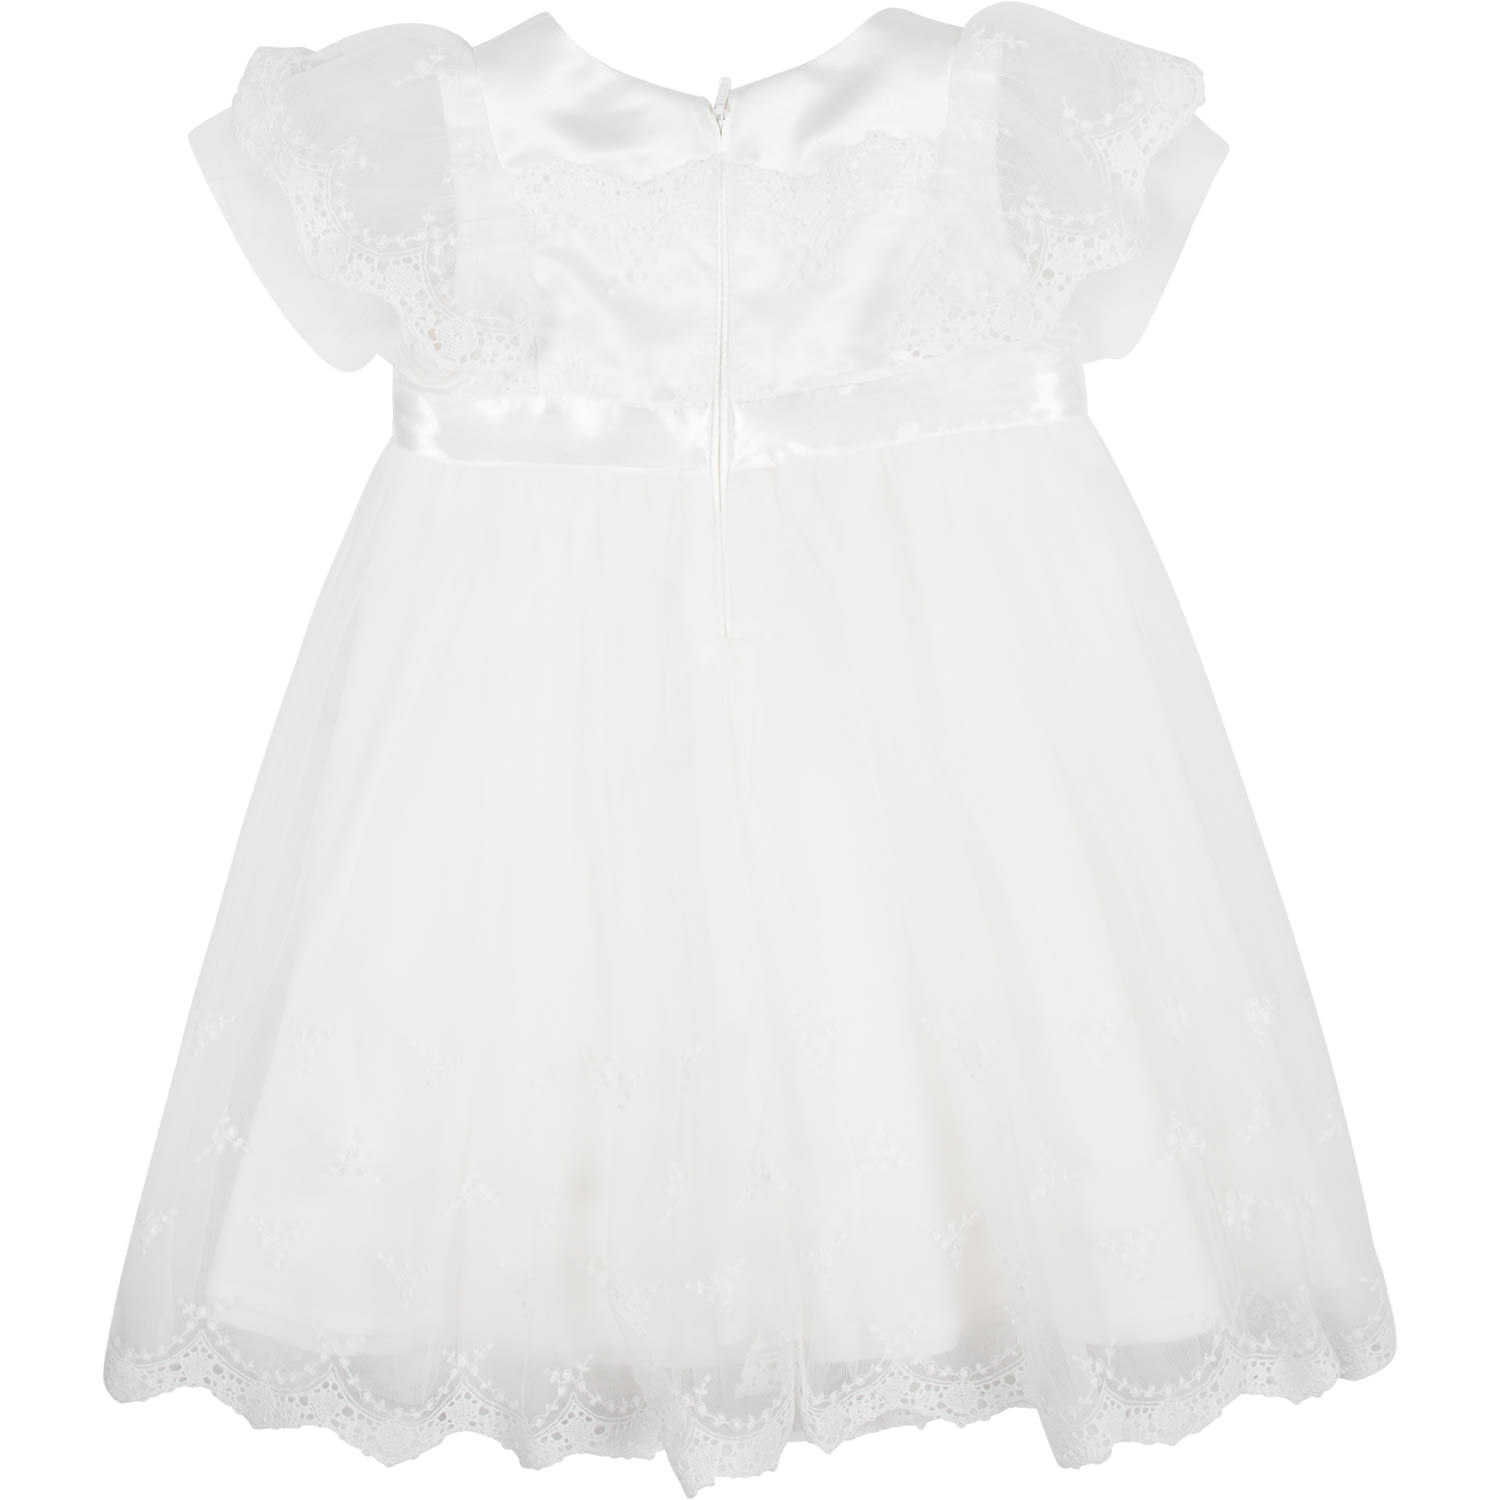 Shop Monnalisa White Dress For Baby Girl With Embroidery And Bow